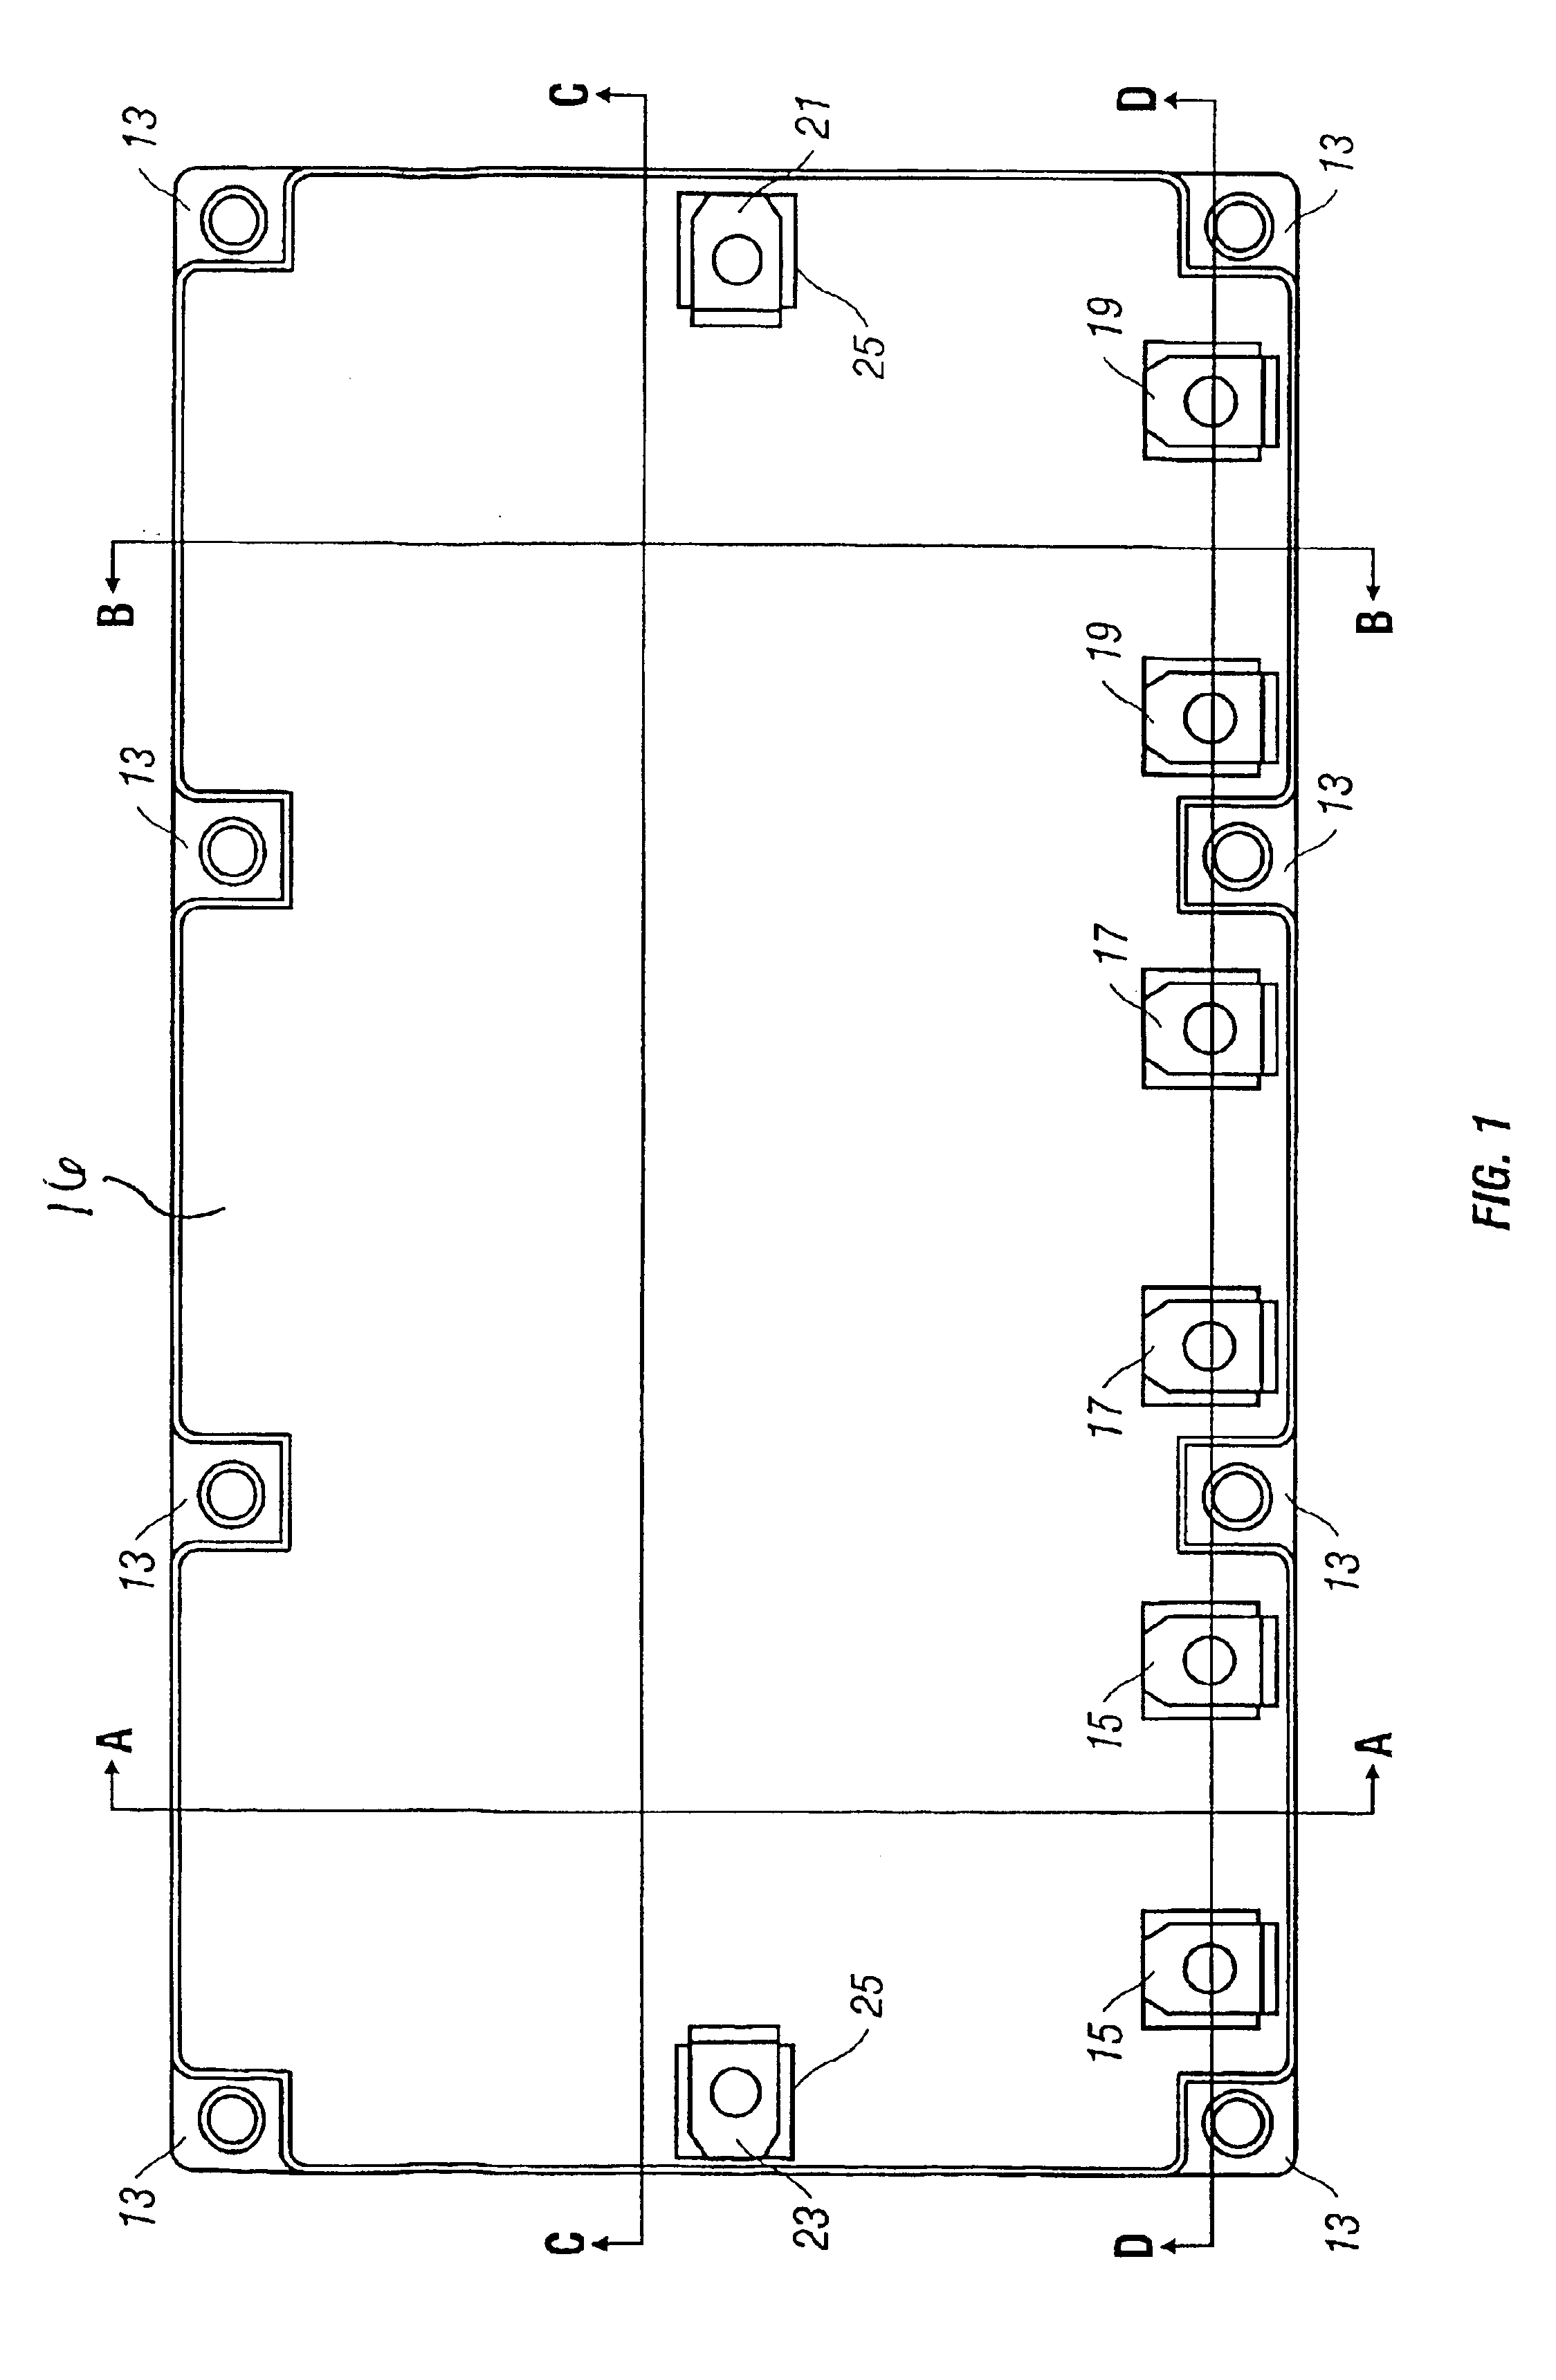 Substrate-level DC bus design to reduce module inductance